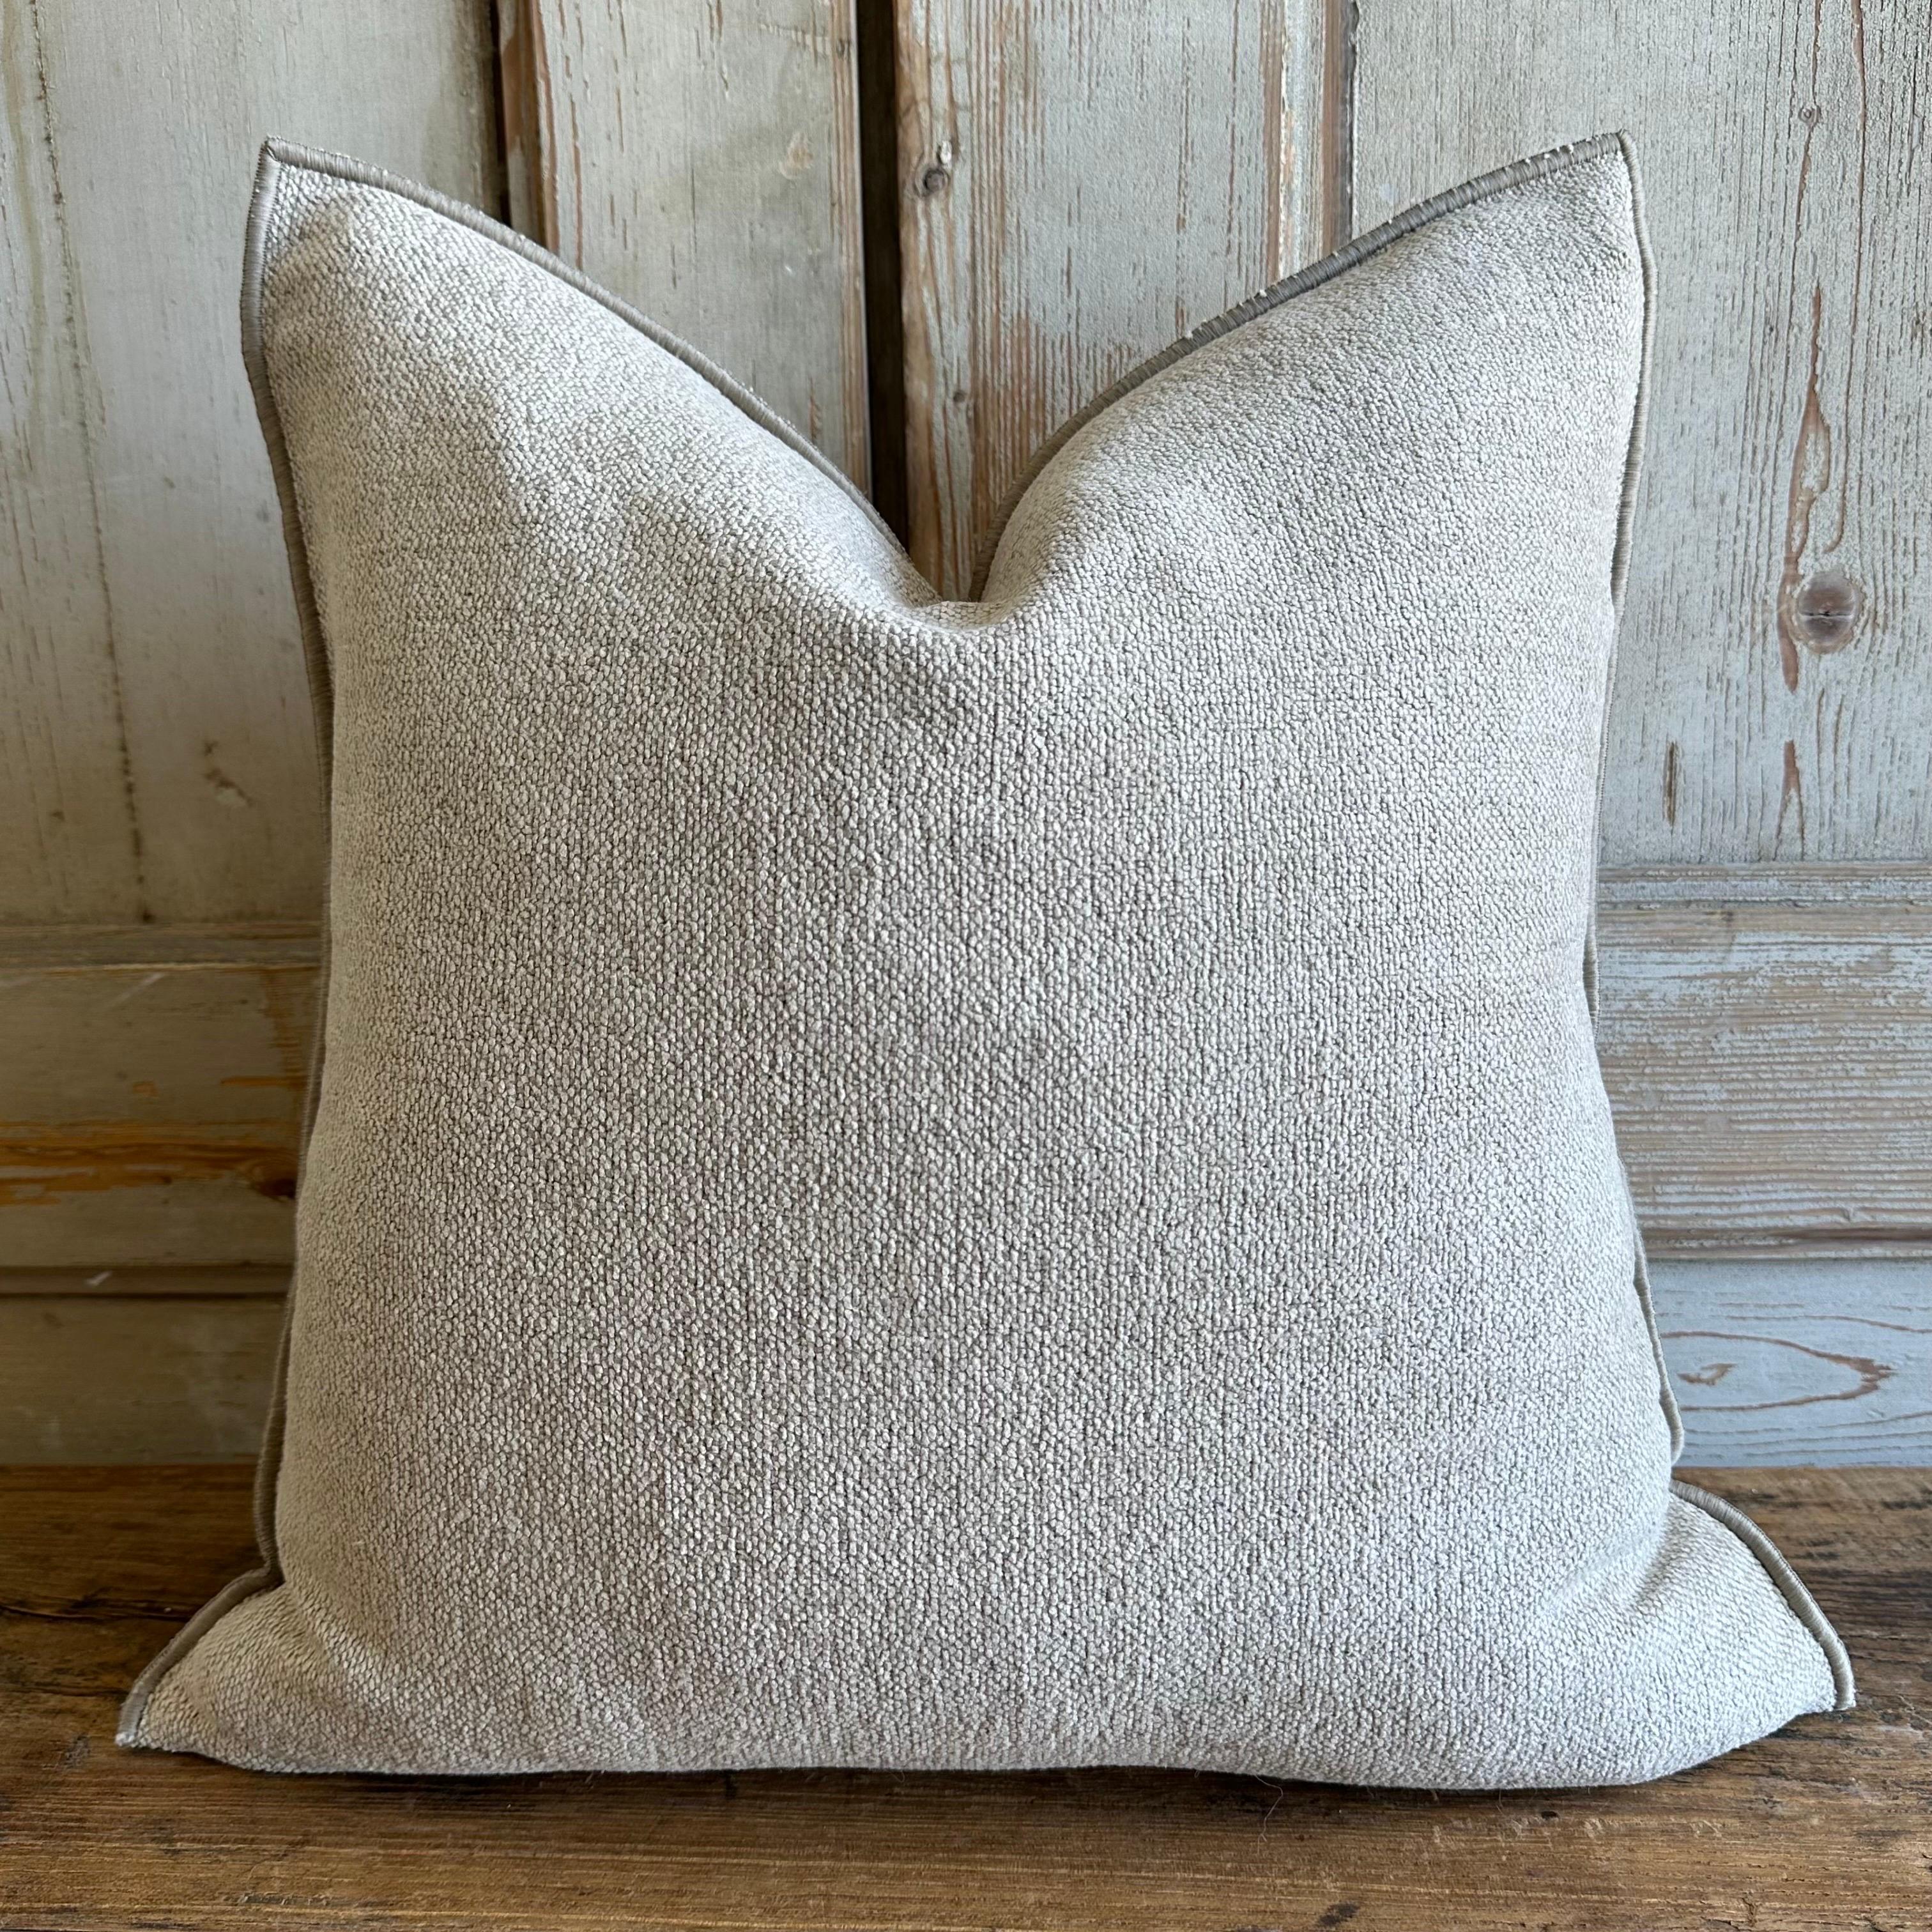 Welcome to bloomhomeinc we stock over 2000 items, please scroll down and click view sellers other items to see more!
Custom made in France
Linen Chenille Pillow with a soft hand.
Color: Ciment (Light gray)
Hidden zipper, antique brass with leather